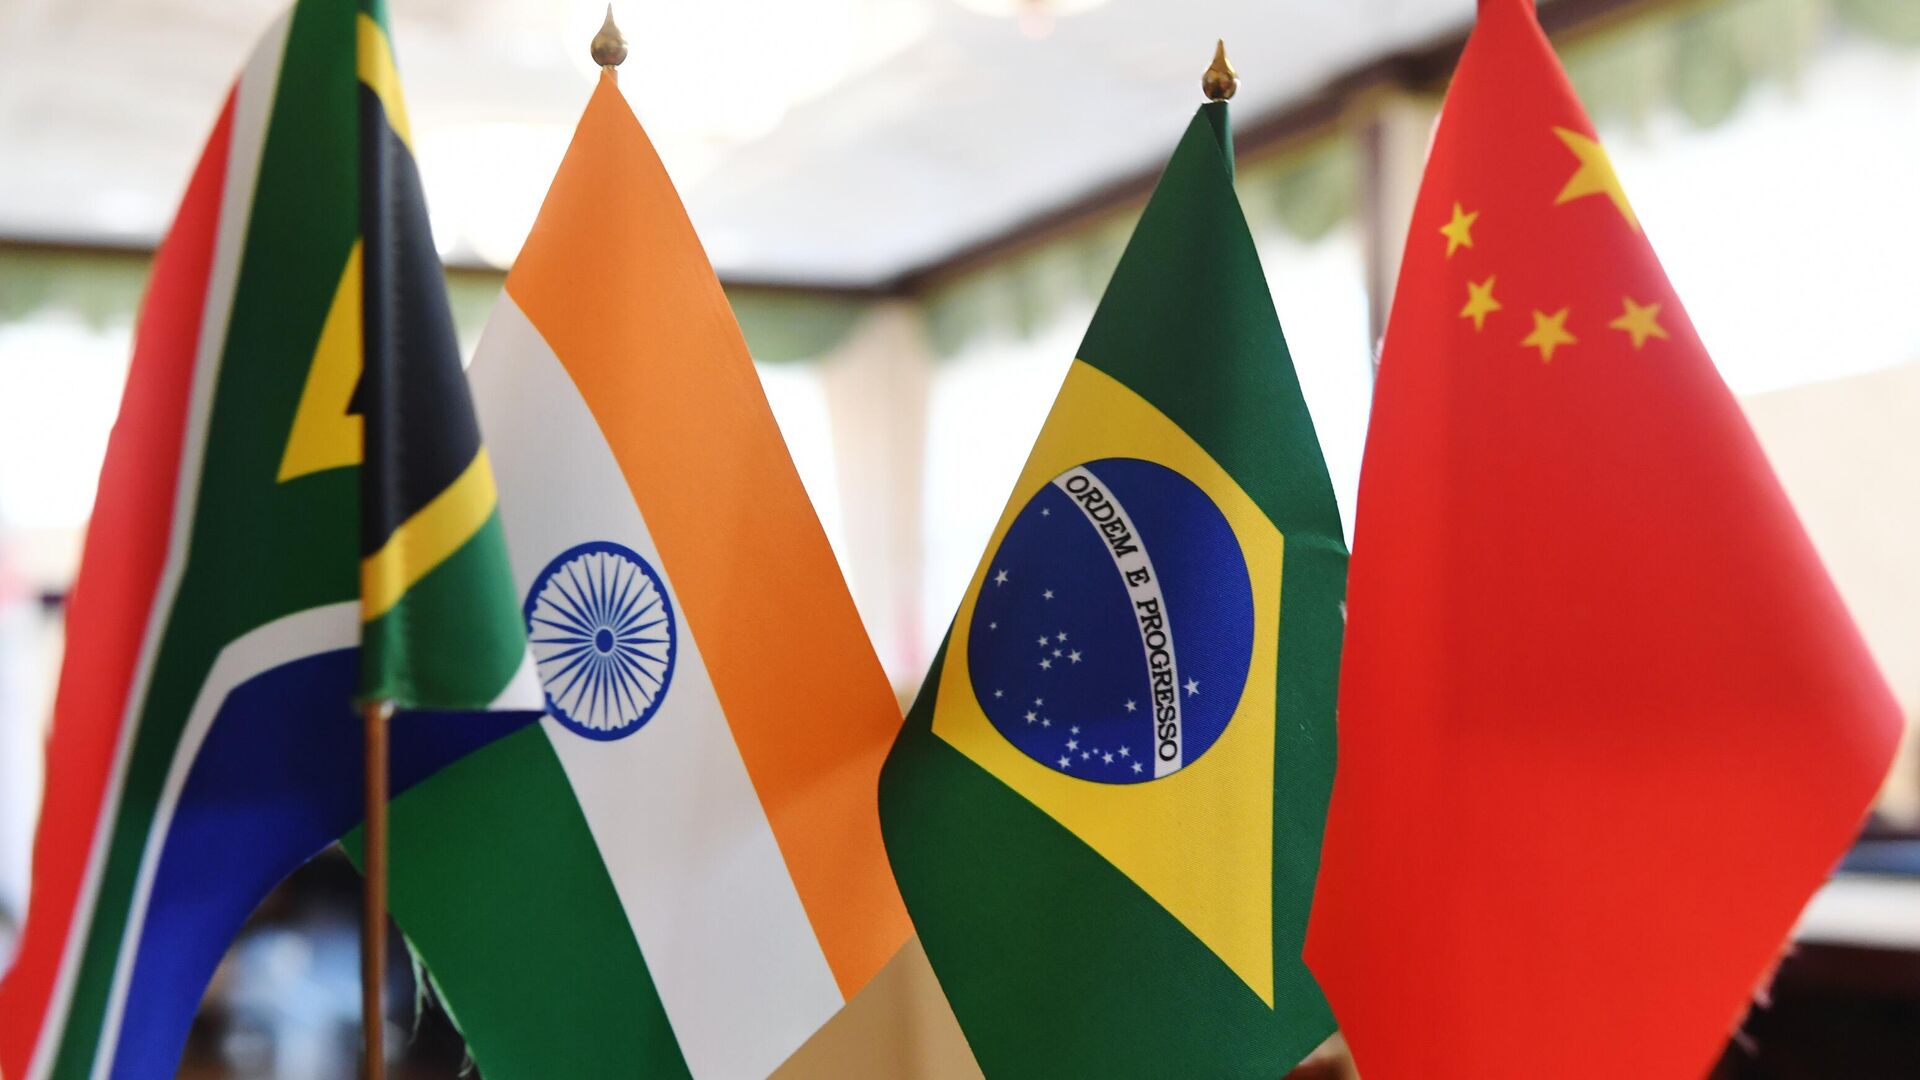 Flags of the BRICS countries: South Africa, India, Brazil and China. - Sputnik Afrique, 1920, 11.05.2023